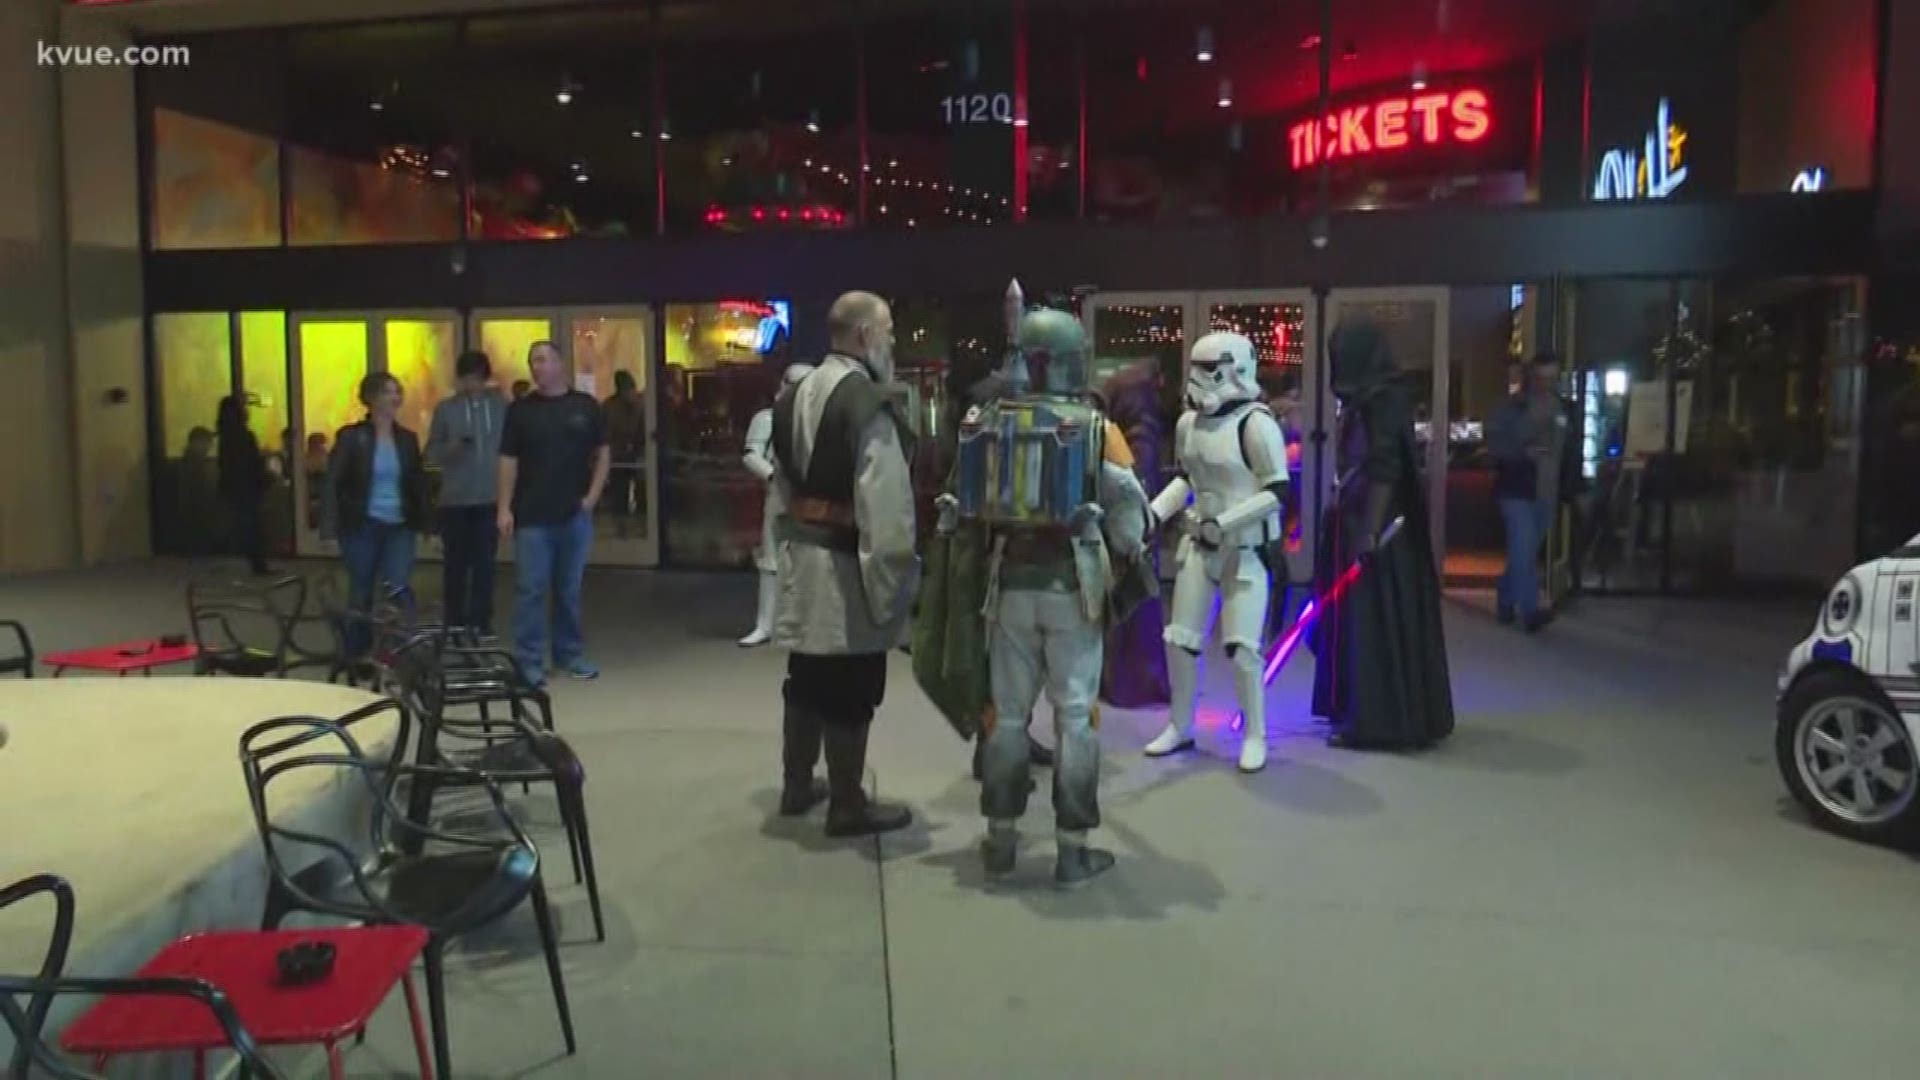 You can bet "Star Wars" fans were lined up Thursday night, ready for the premiere of the next installment in the film franchise.